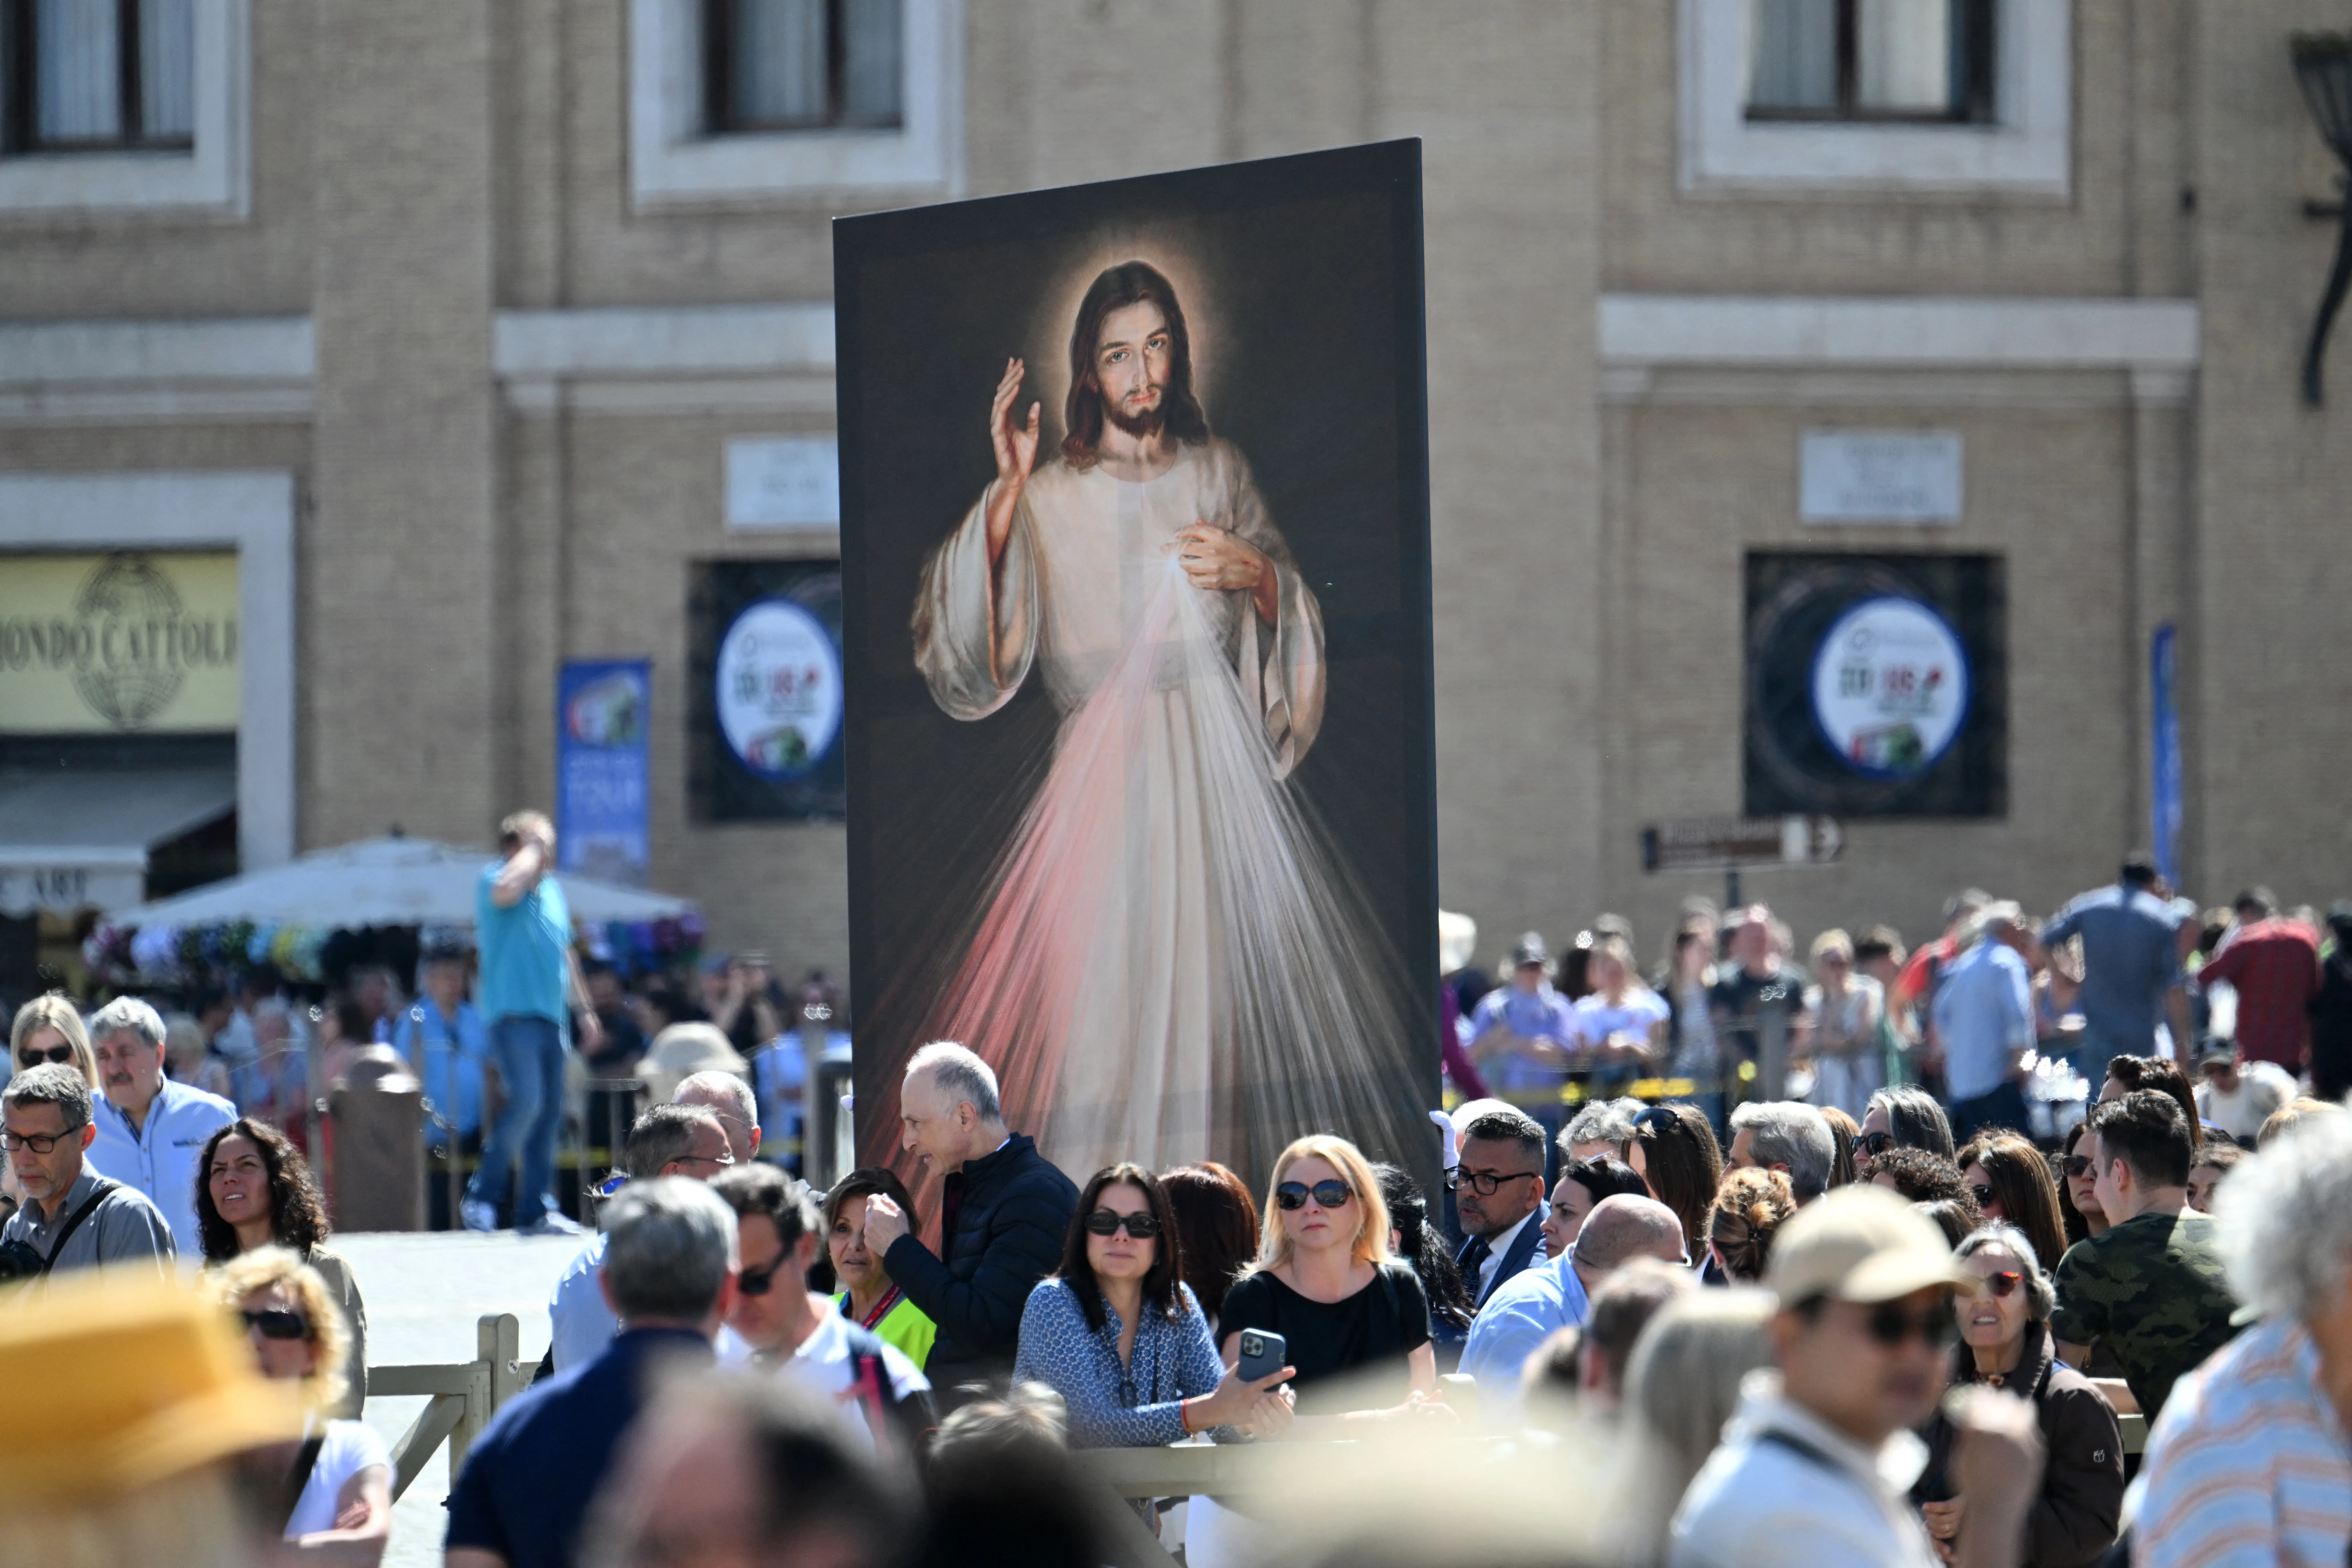 The Divine Mercy image is displayed at St. Peter's Square before Pope Francis Regina Caeli prayer on April 7, 2024. / Credit: ALBERTO PIZZOLI/AFP via Getty Images